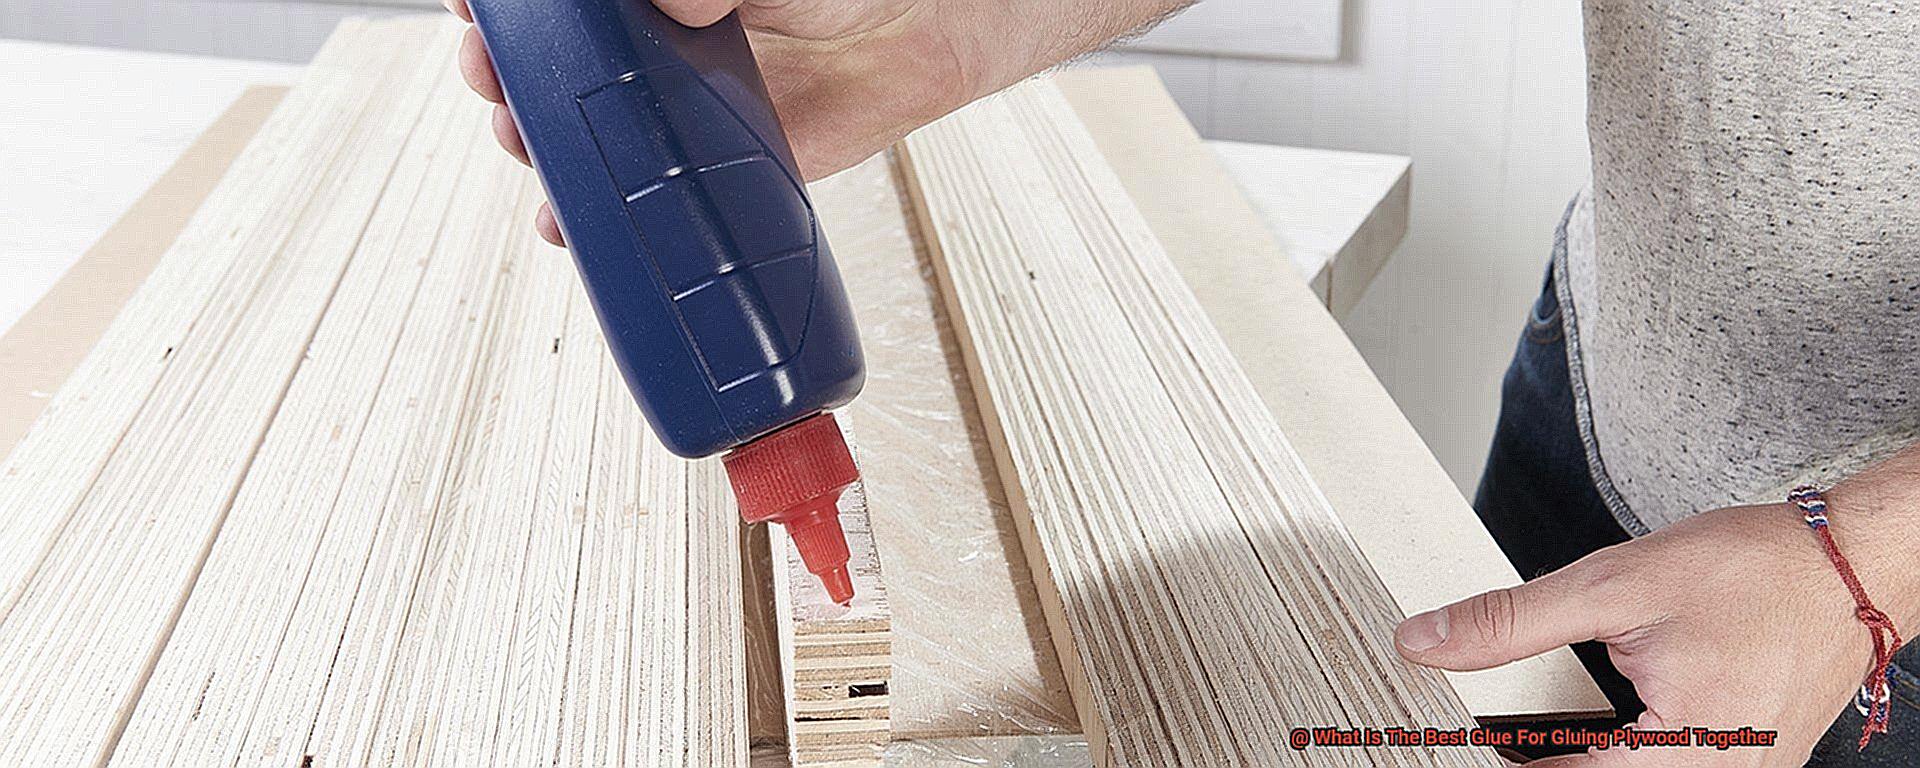 What Is The Best Glue For Gluing Plywood Together-4